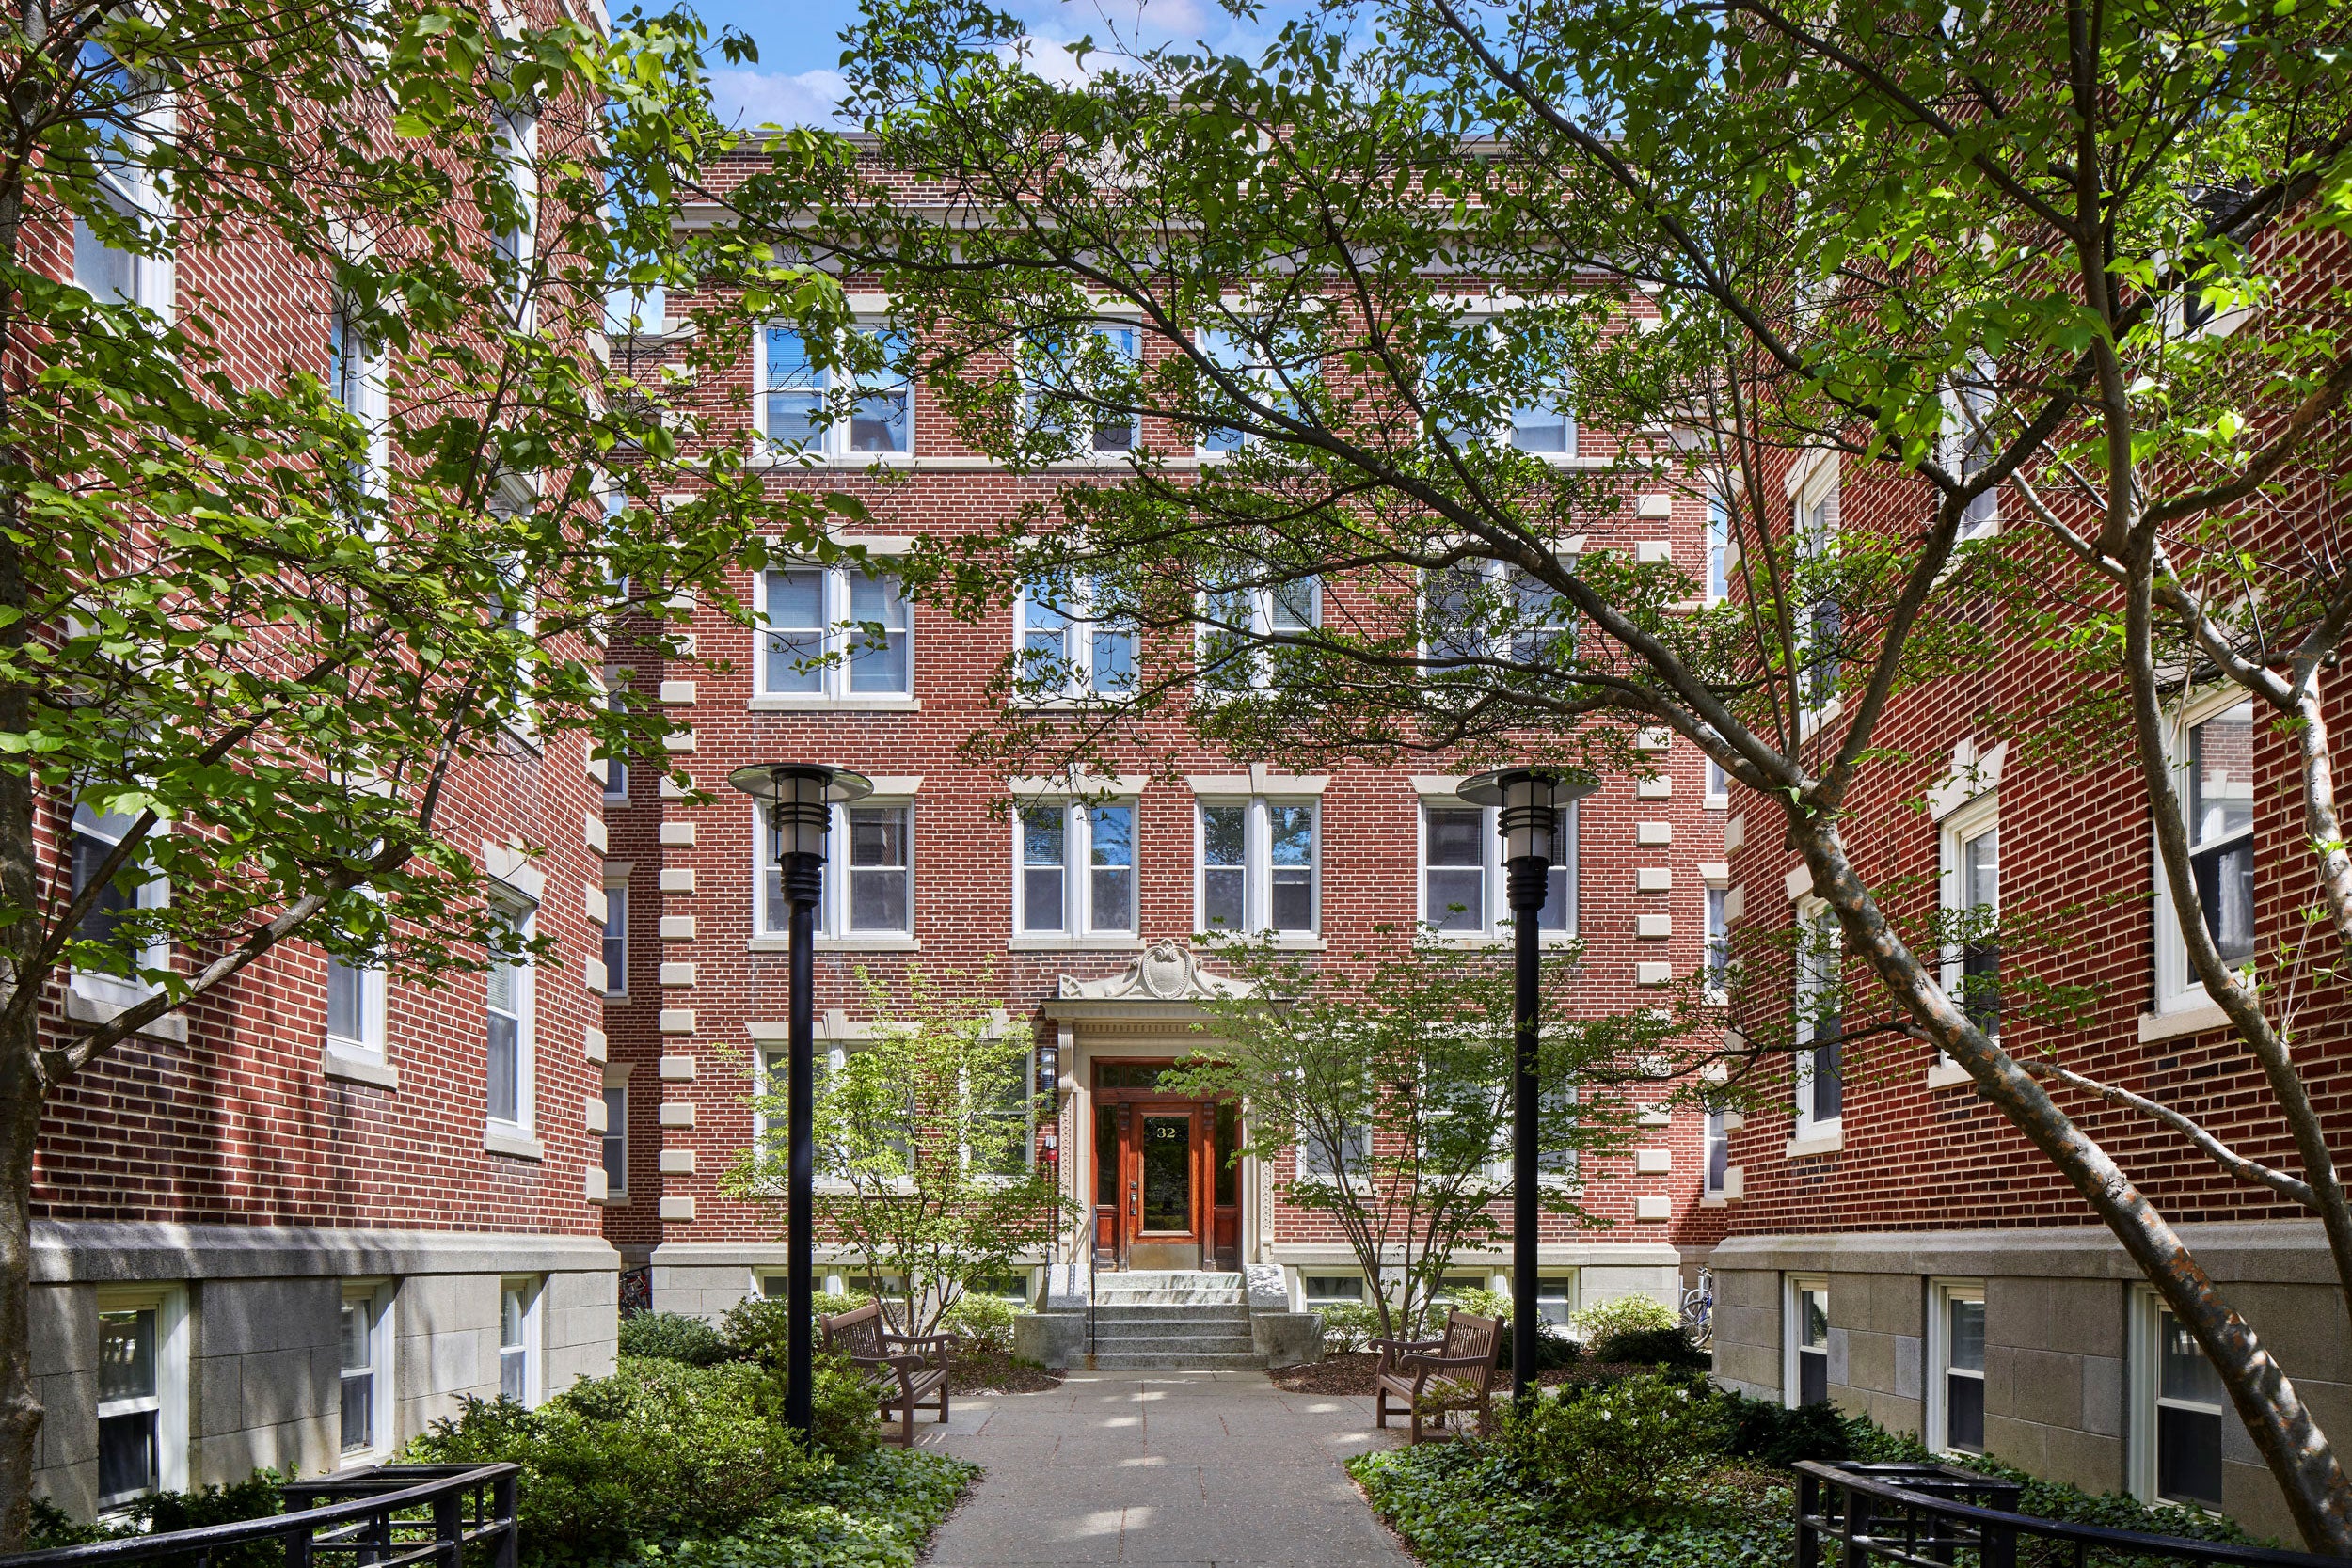 One of 70 properties managed by Harvard University Housing